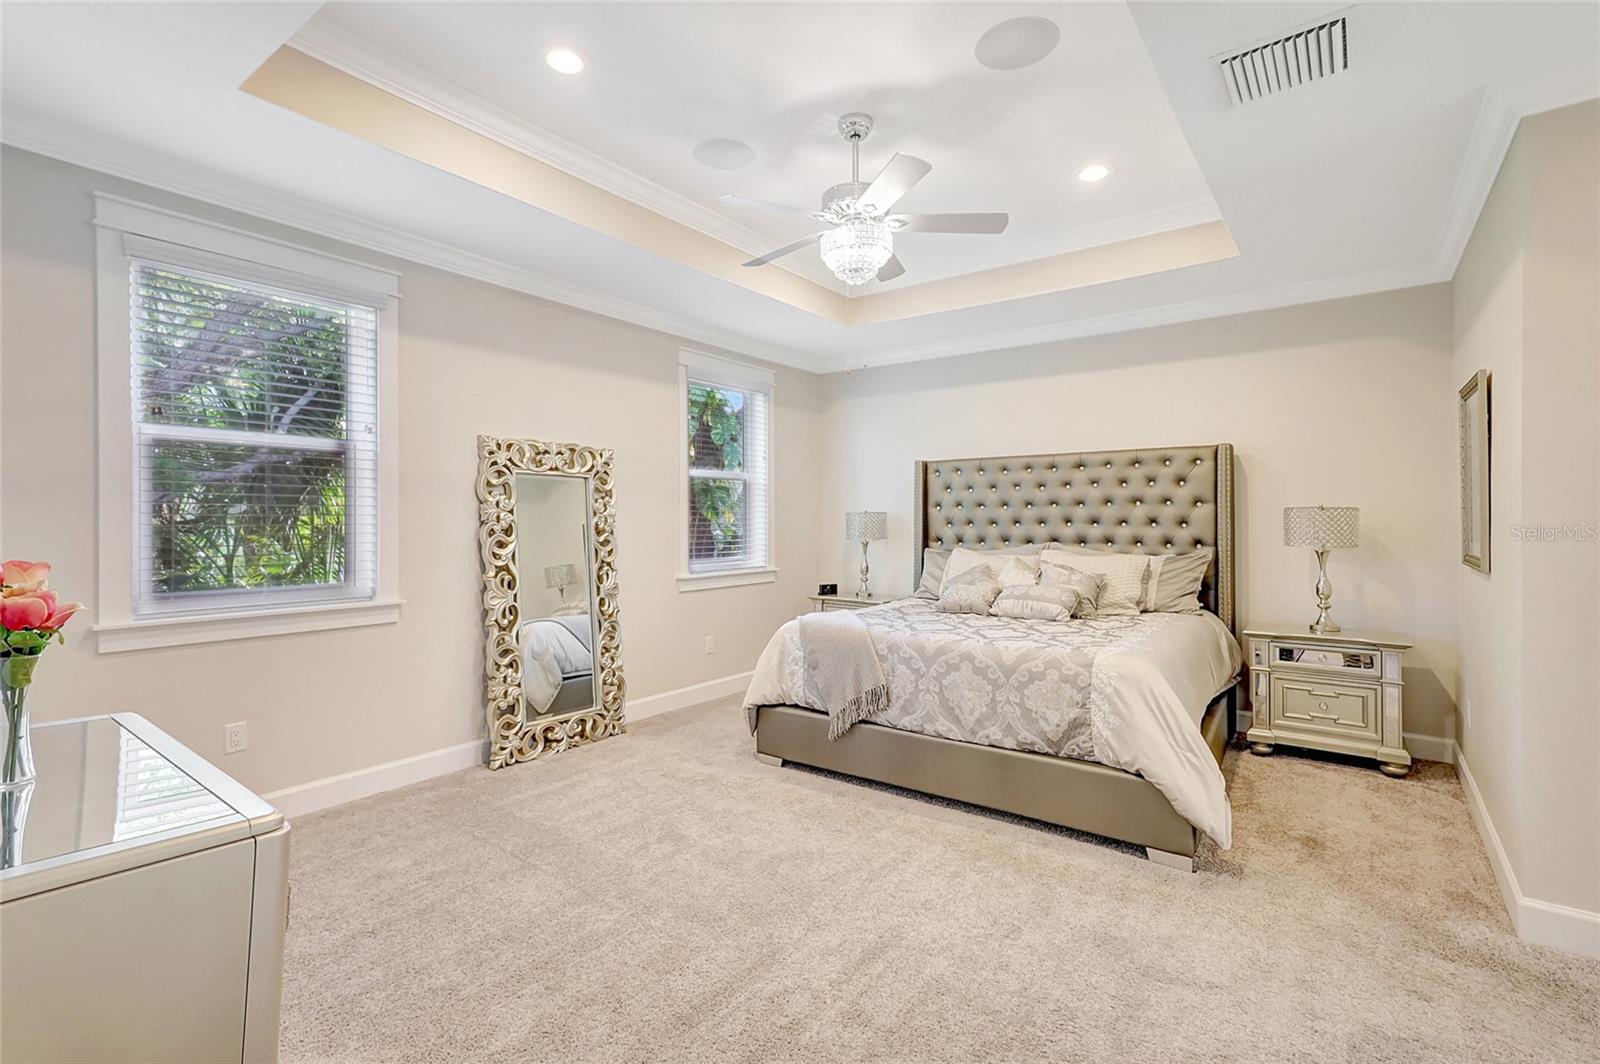 Luxurious Primary Bedroom with Tray Ceiling, in ceiling speakers